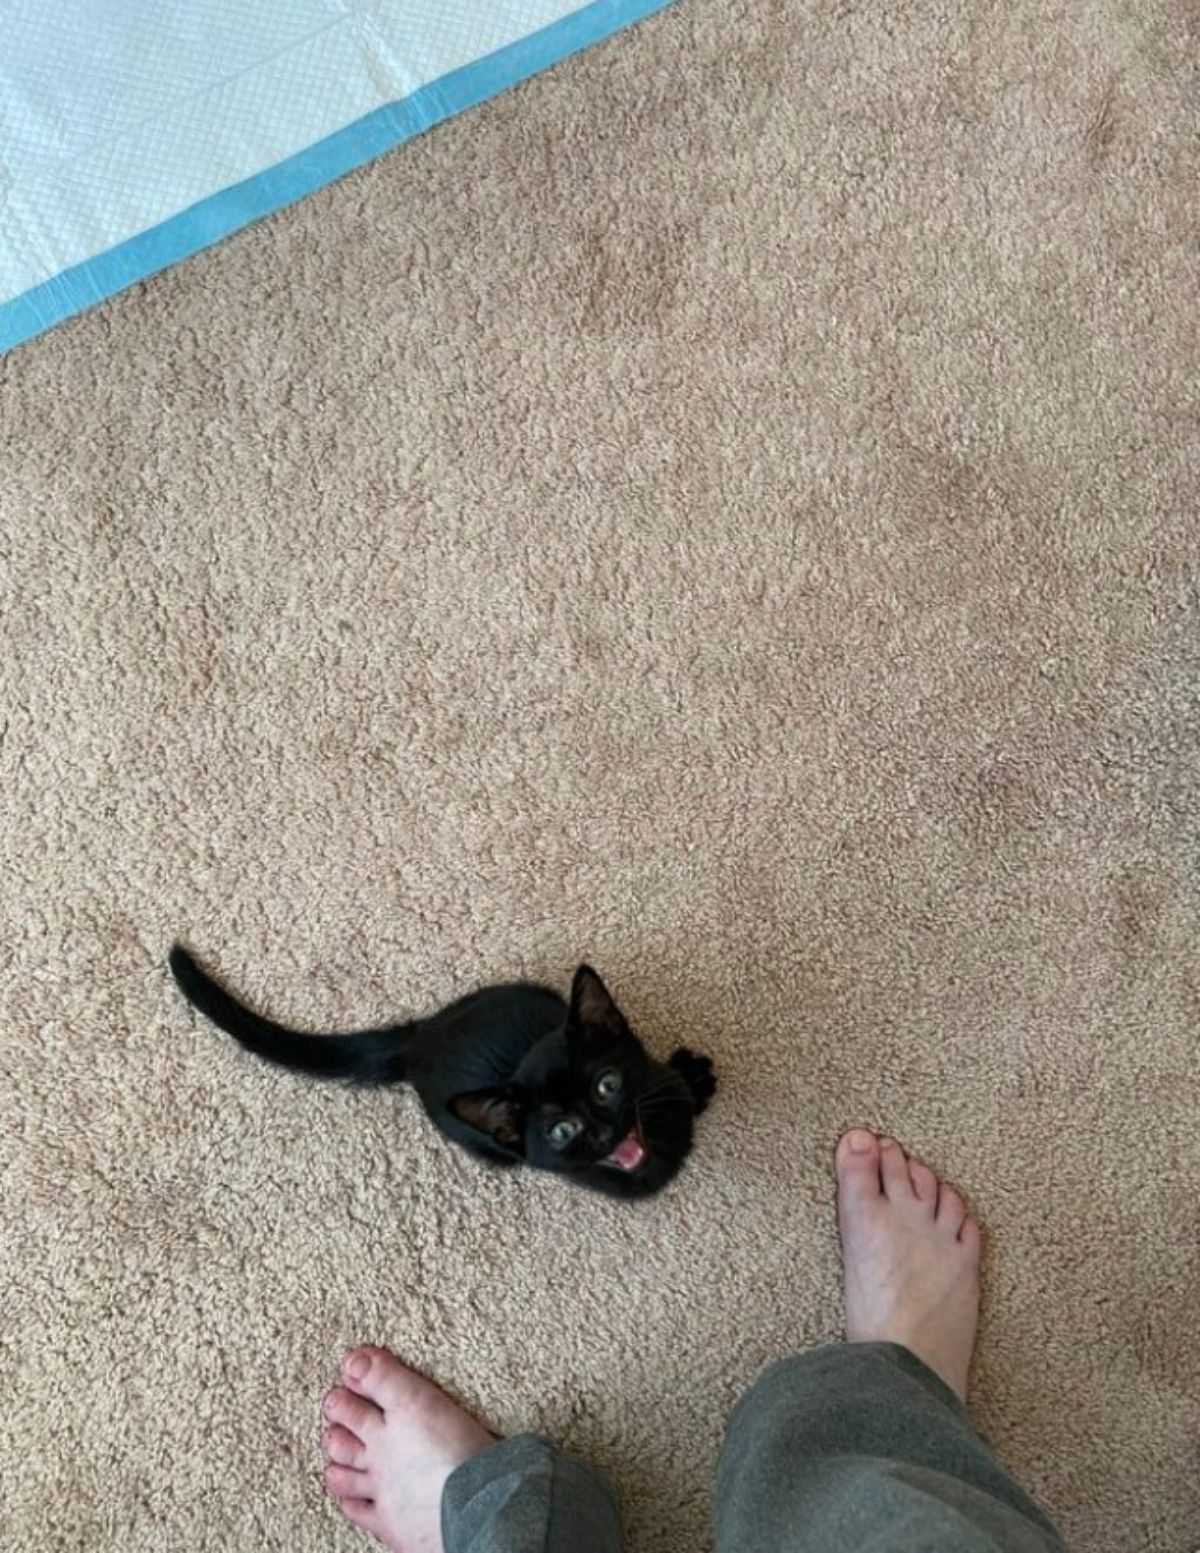 black kitten sitting on brown carpet by someone's feet and looking up